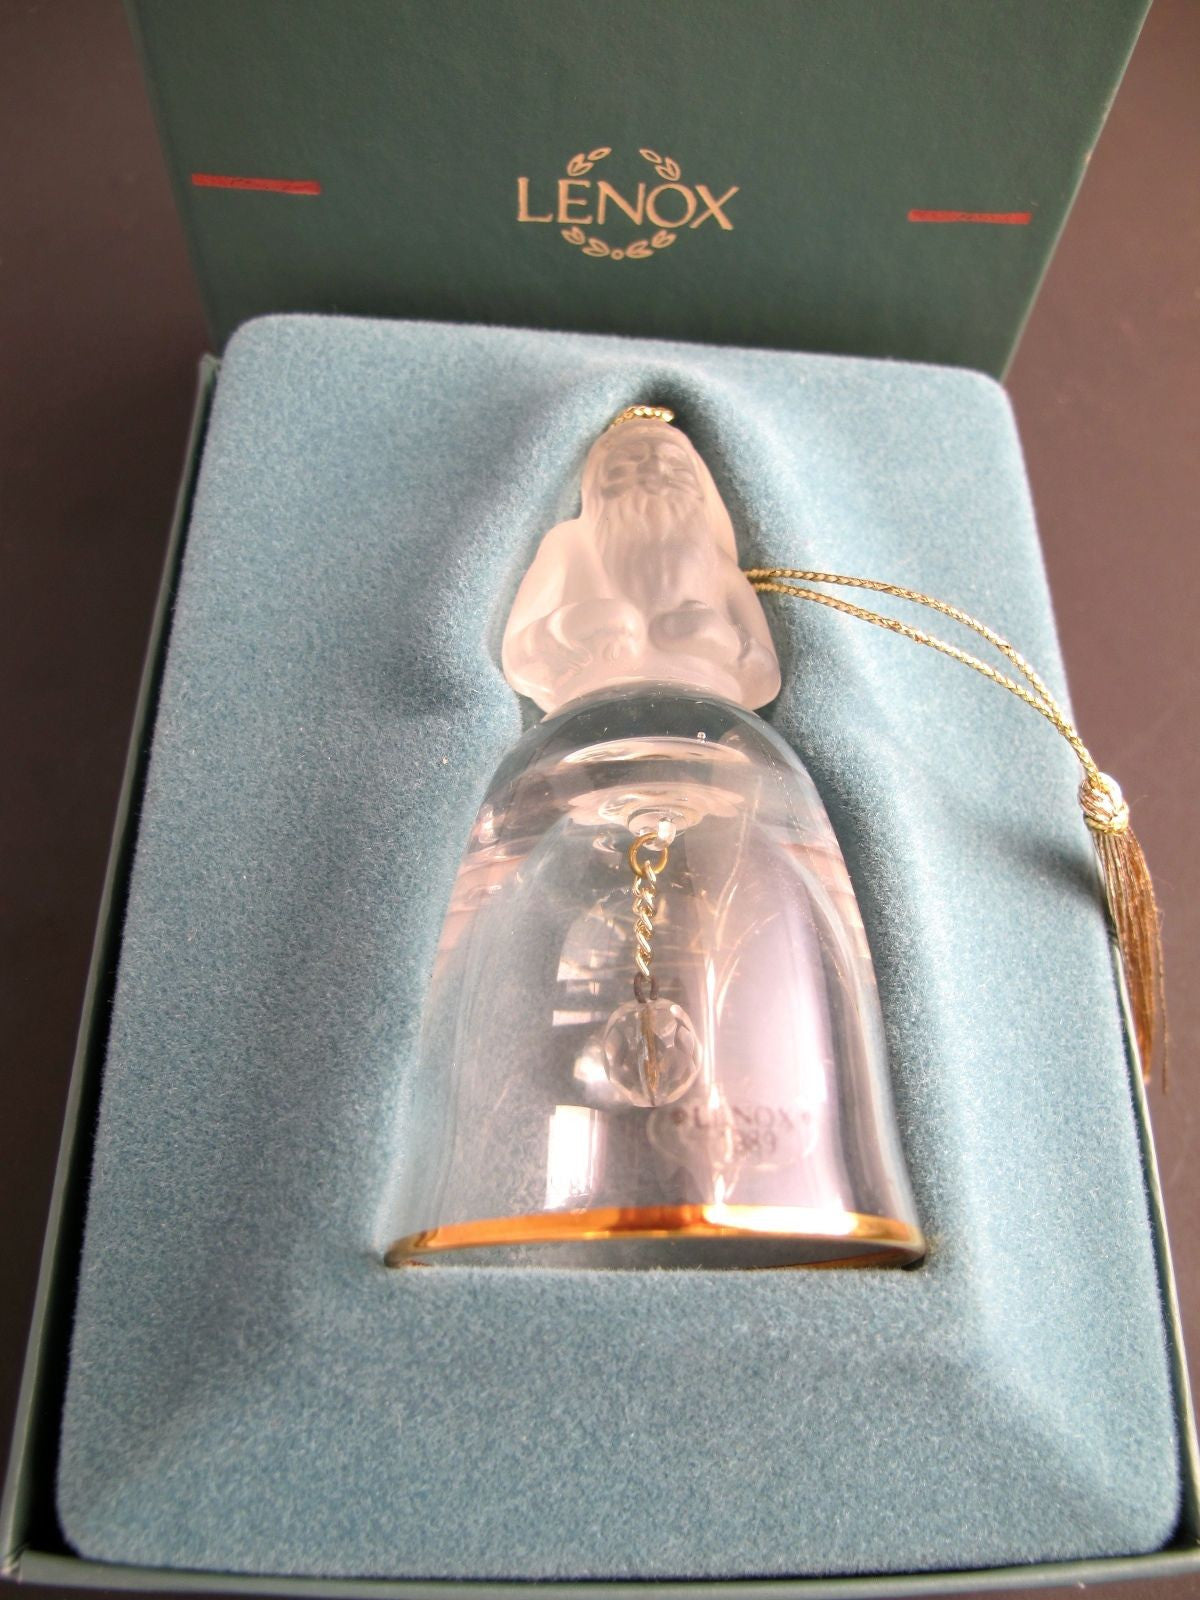 Lenox Crystal 1989 St. Nicholas Tree miniature bell ornament Made in USA - O'Rourke crystal awards & gifts abp cut glass